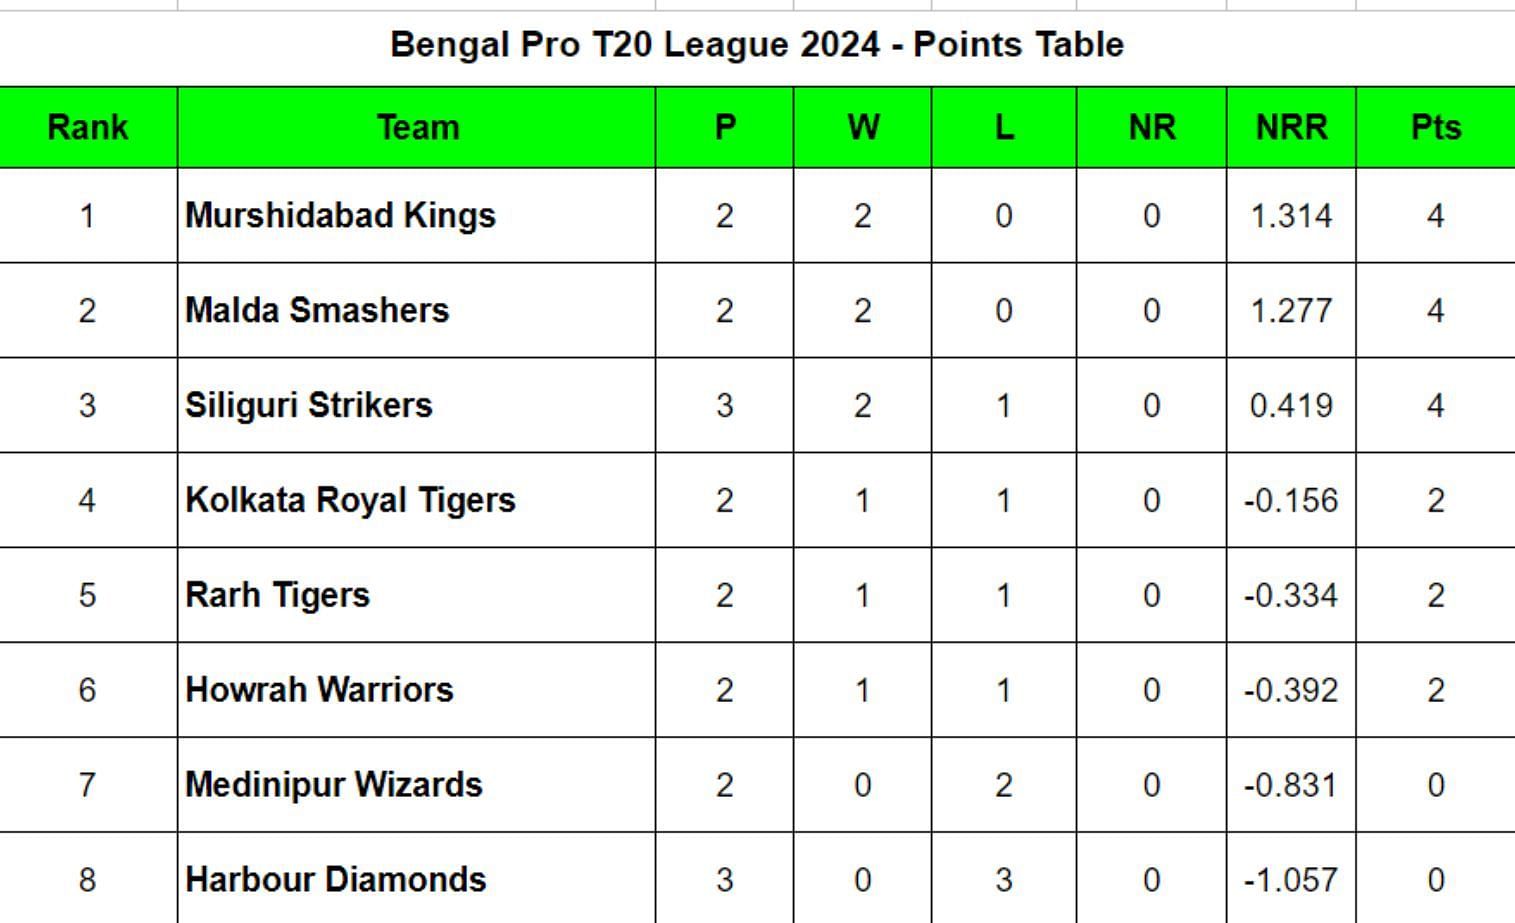 Bengal Pro T20 League 2024 Points Table: Updated Standings after Harbour Diamonds vs Murshidabad Kings, Match 9